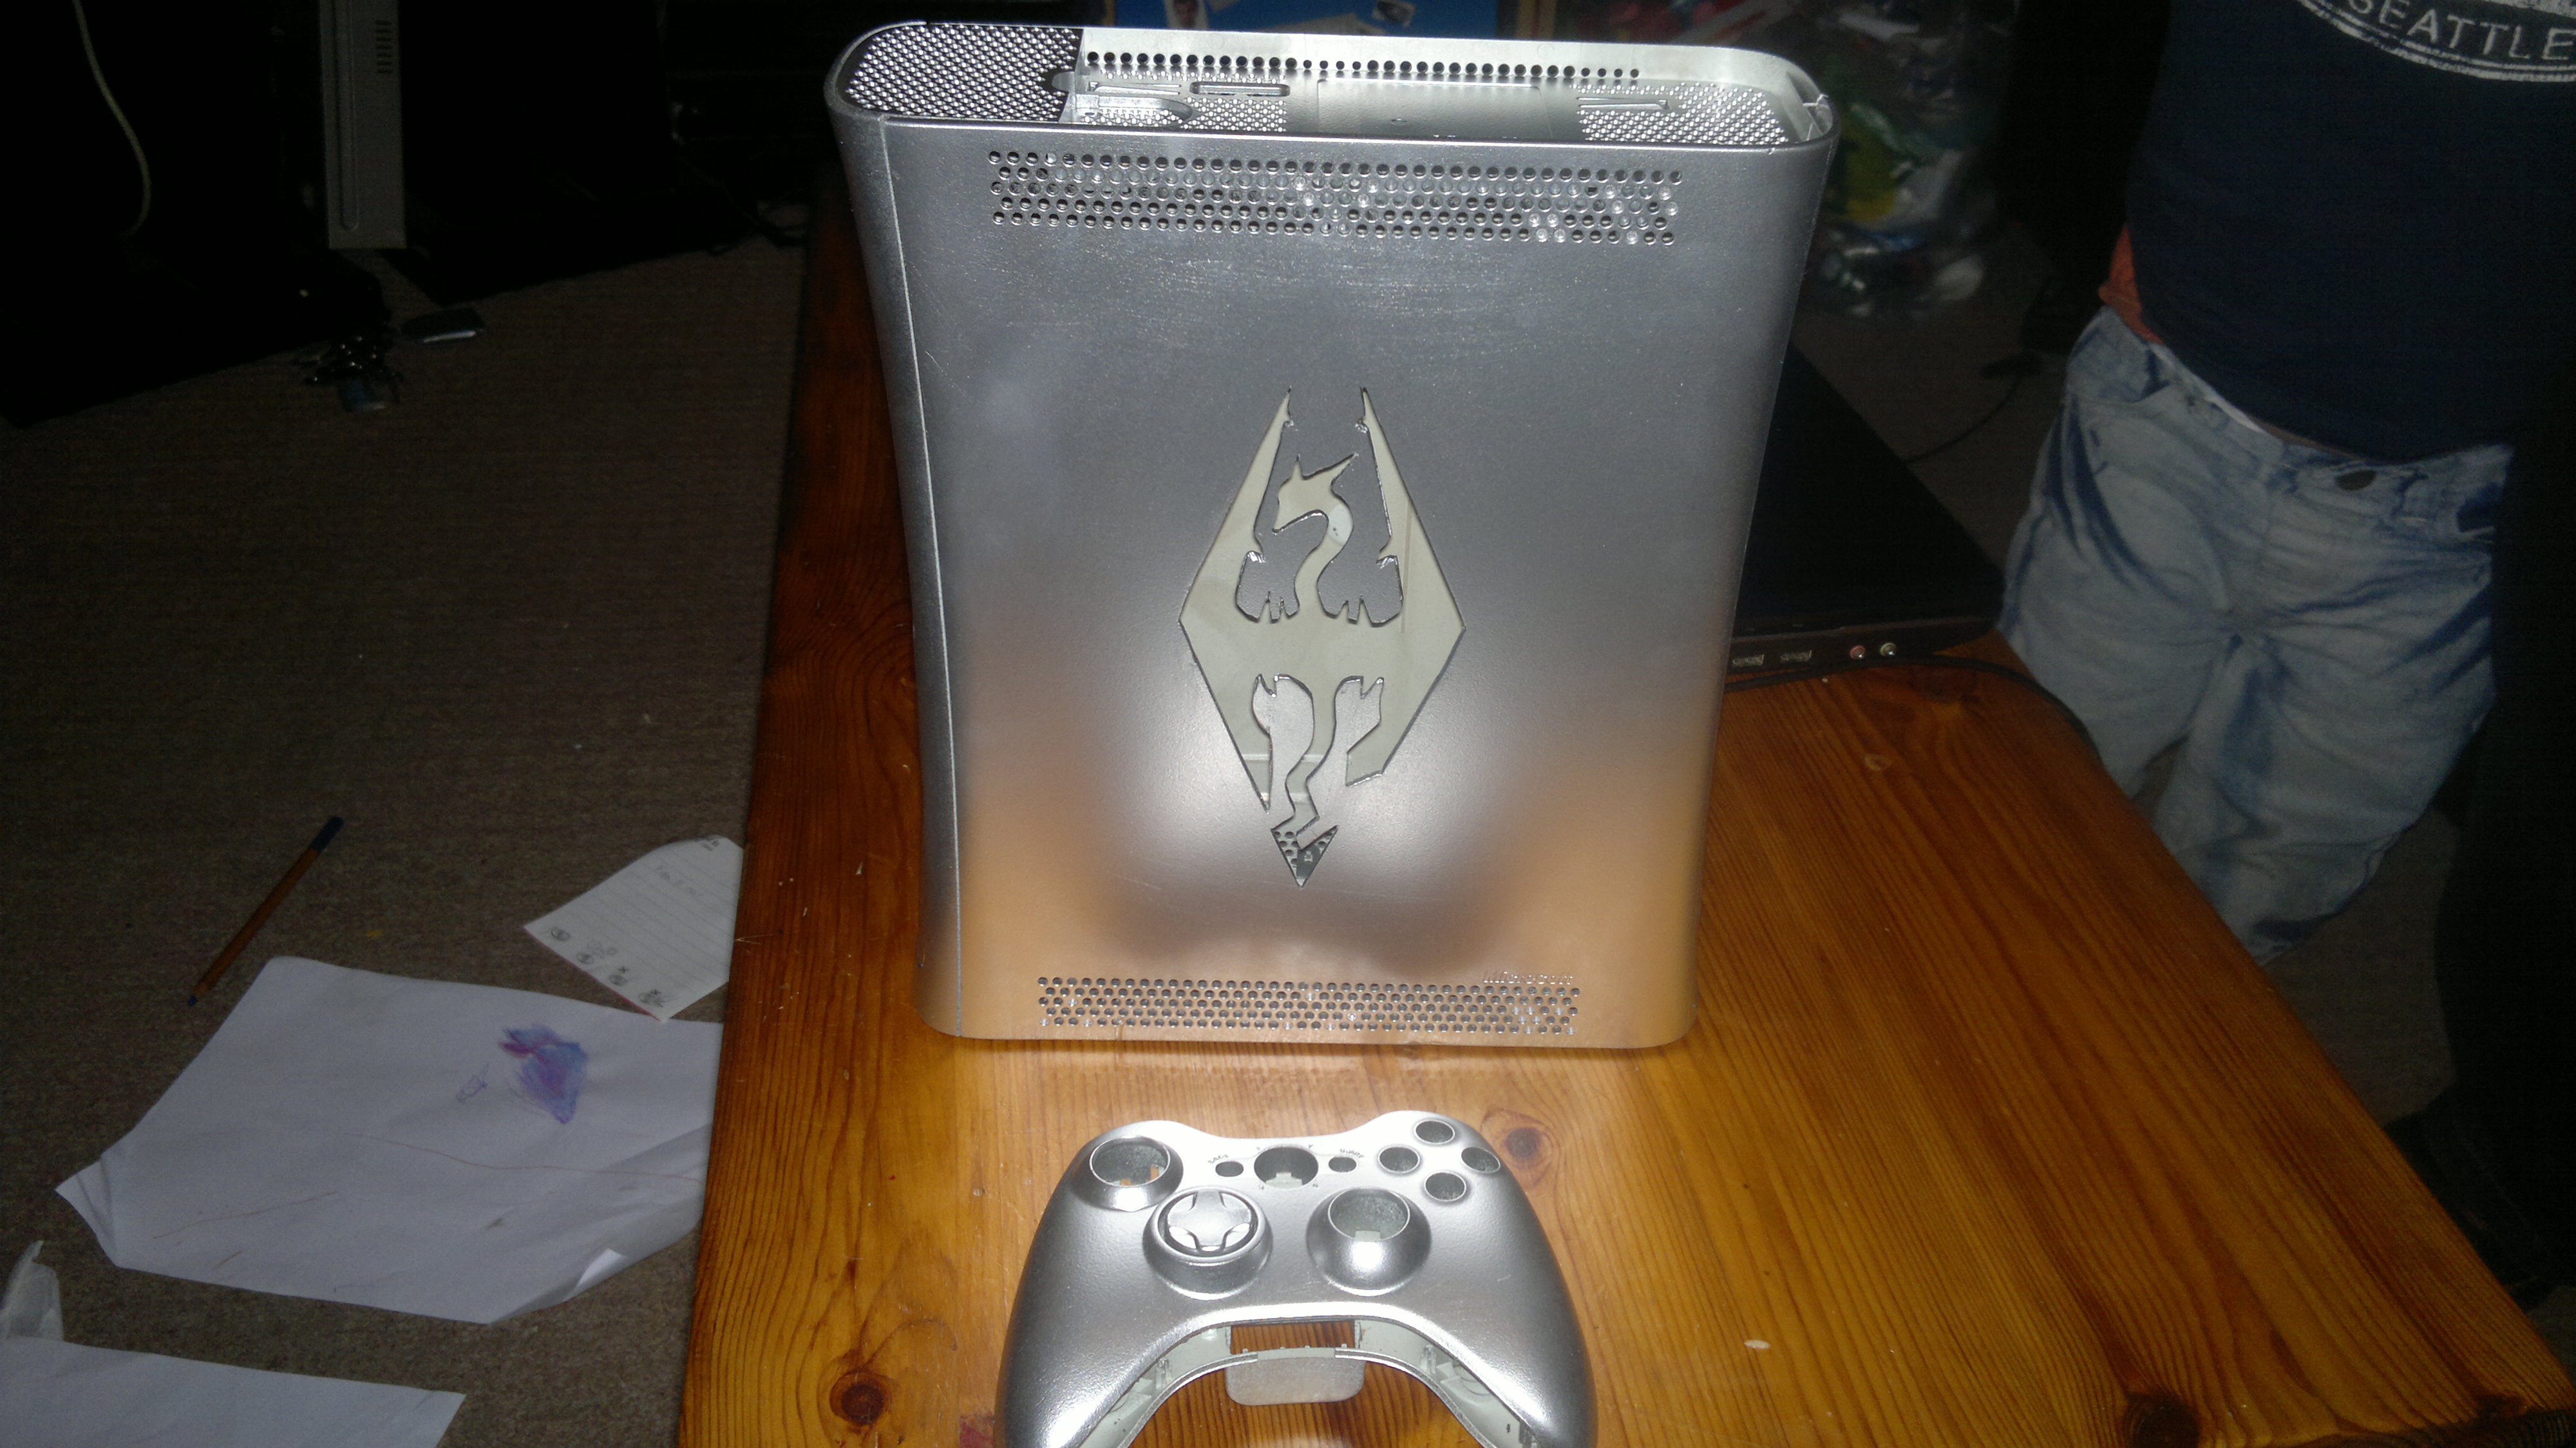 Silver Skyrim Dragon Logo custom cut xbox case and controller. Almost finished, needs a few final coats of paint